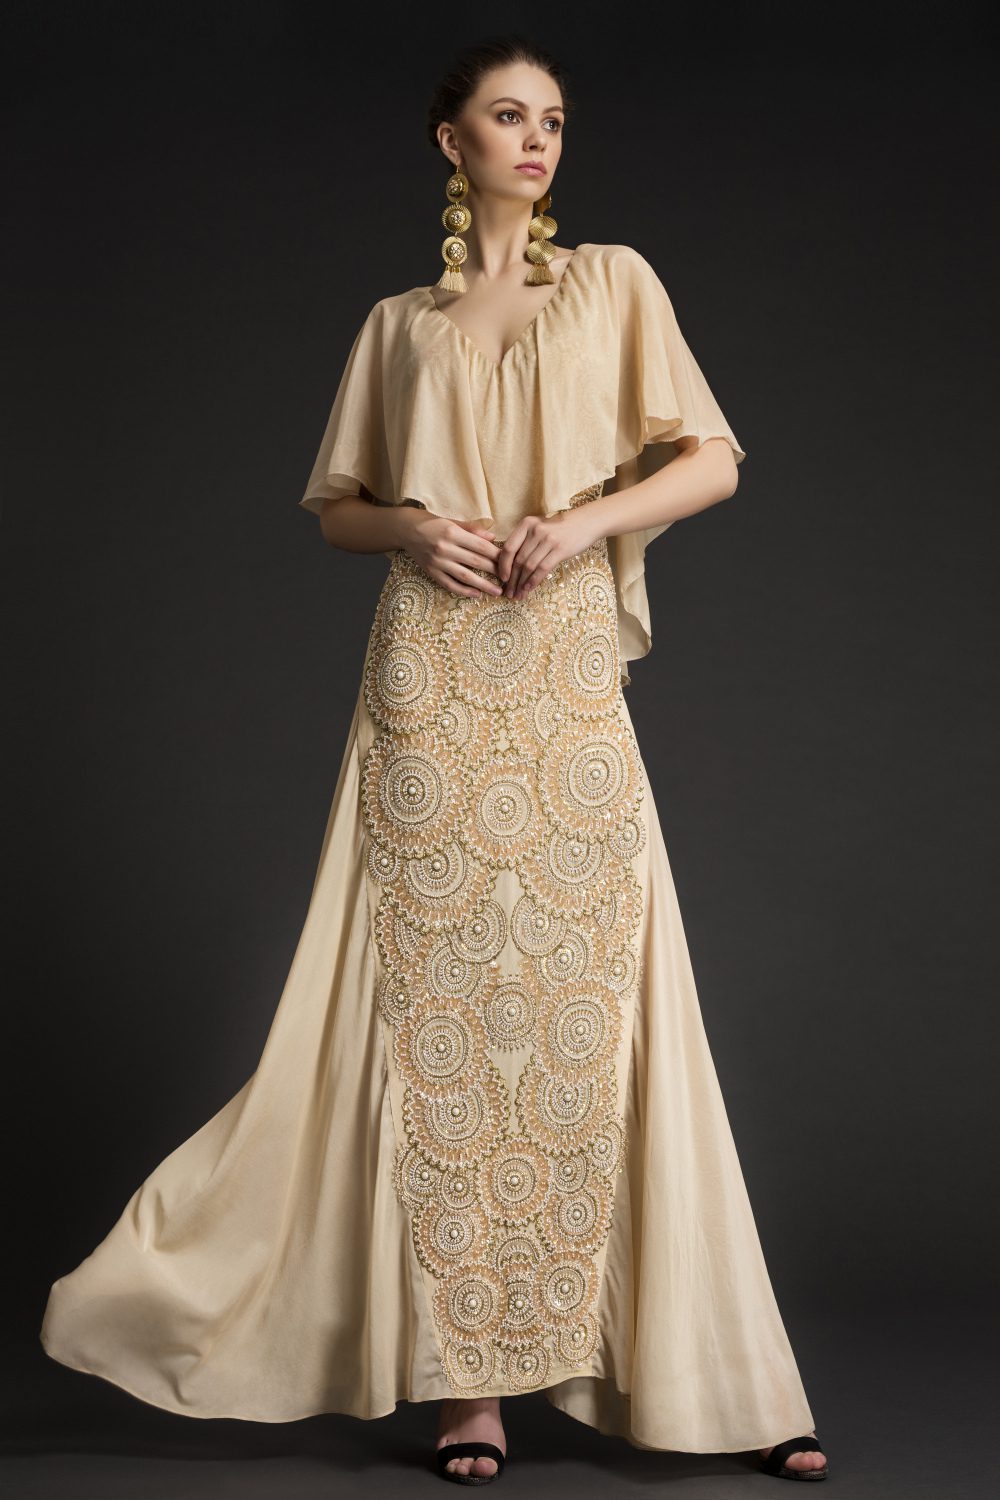 Gold Hand Embroidered Mandala Gown | Beige Embroidered Mandala Gown